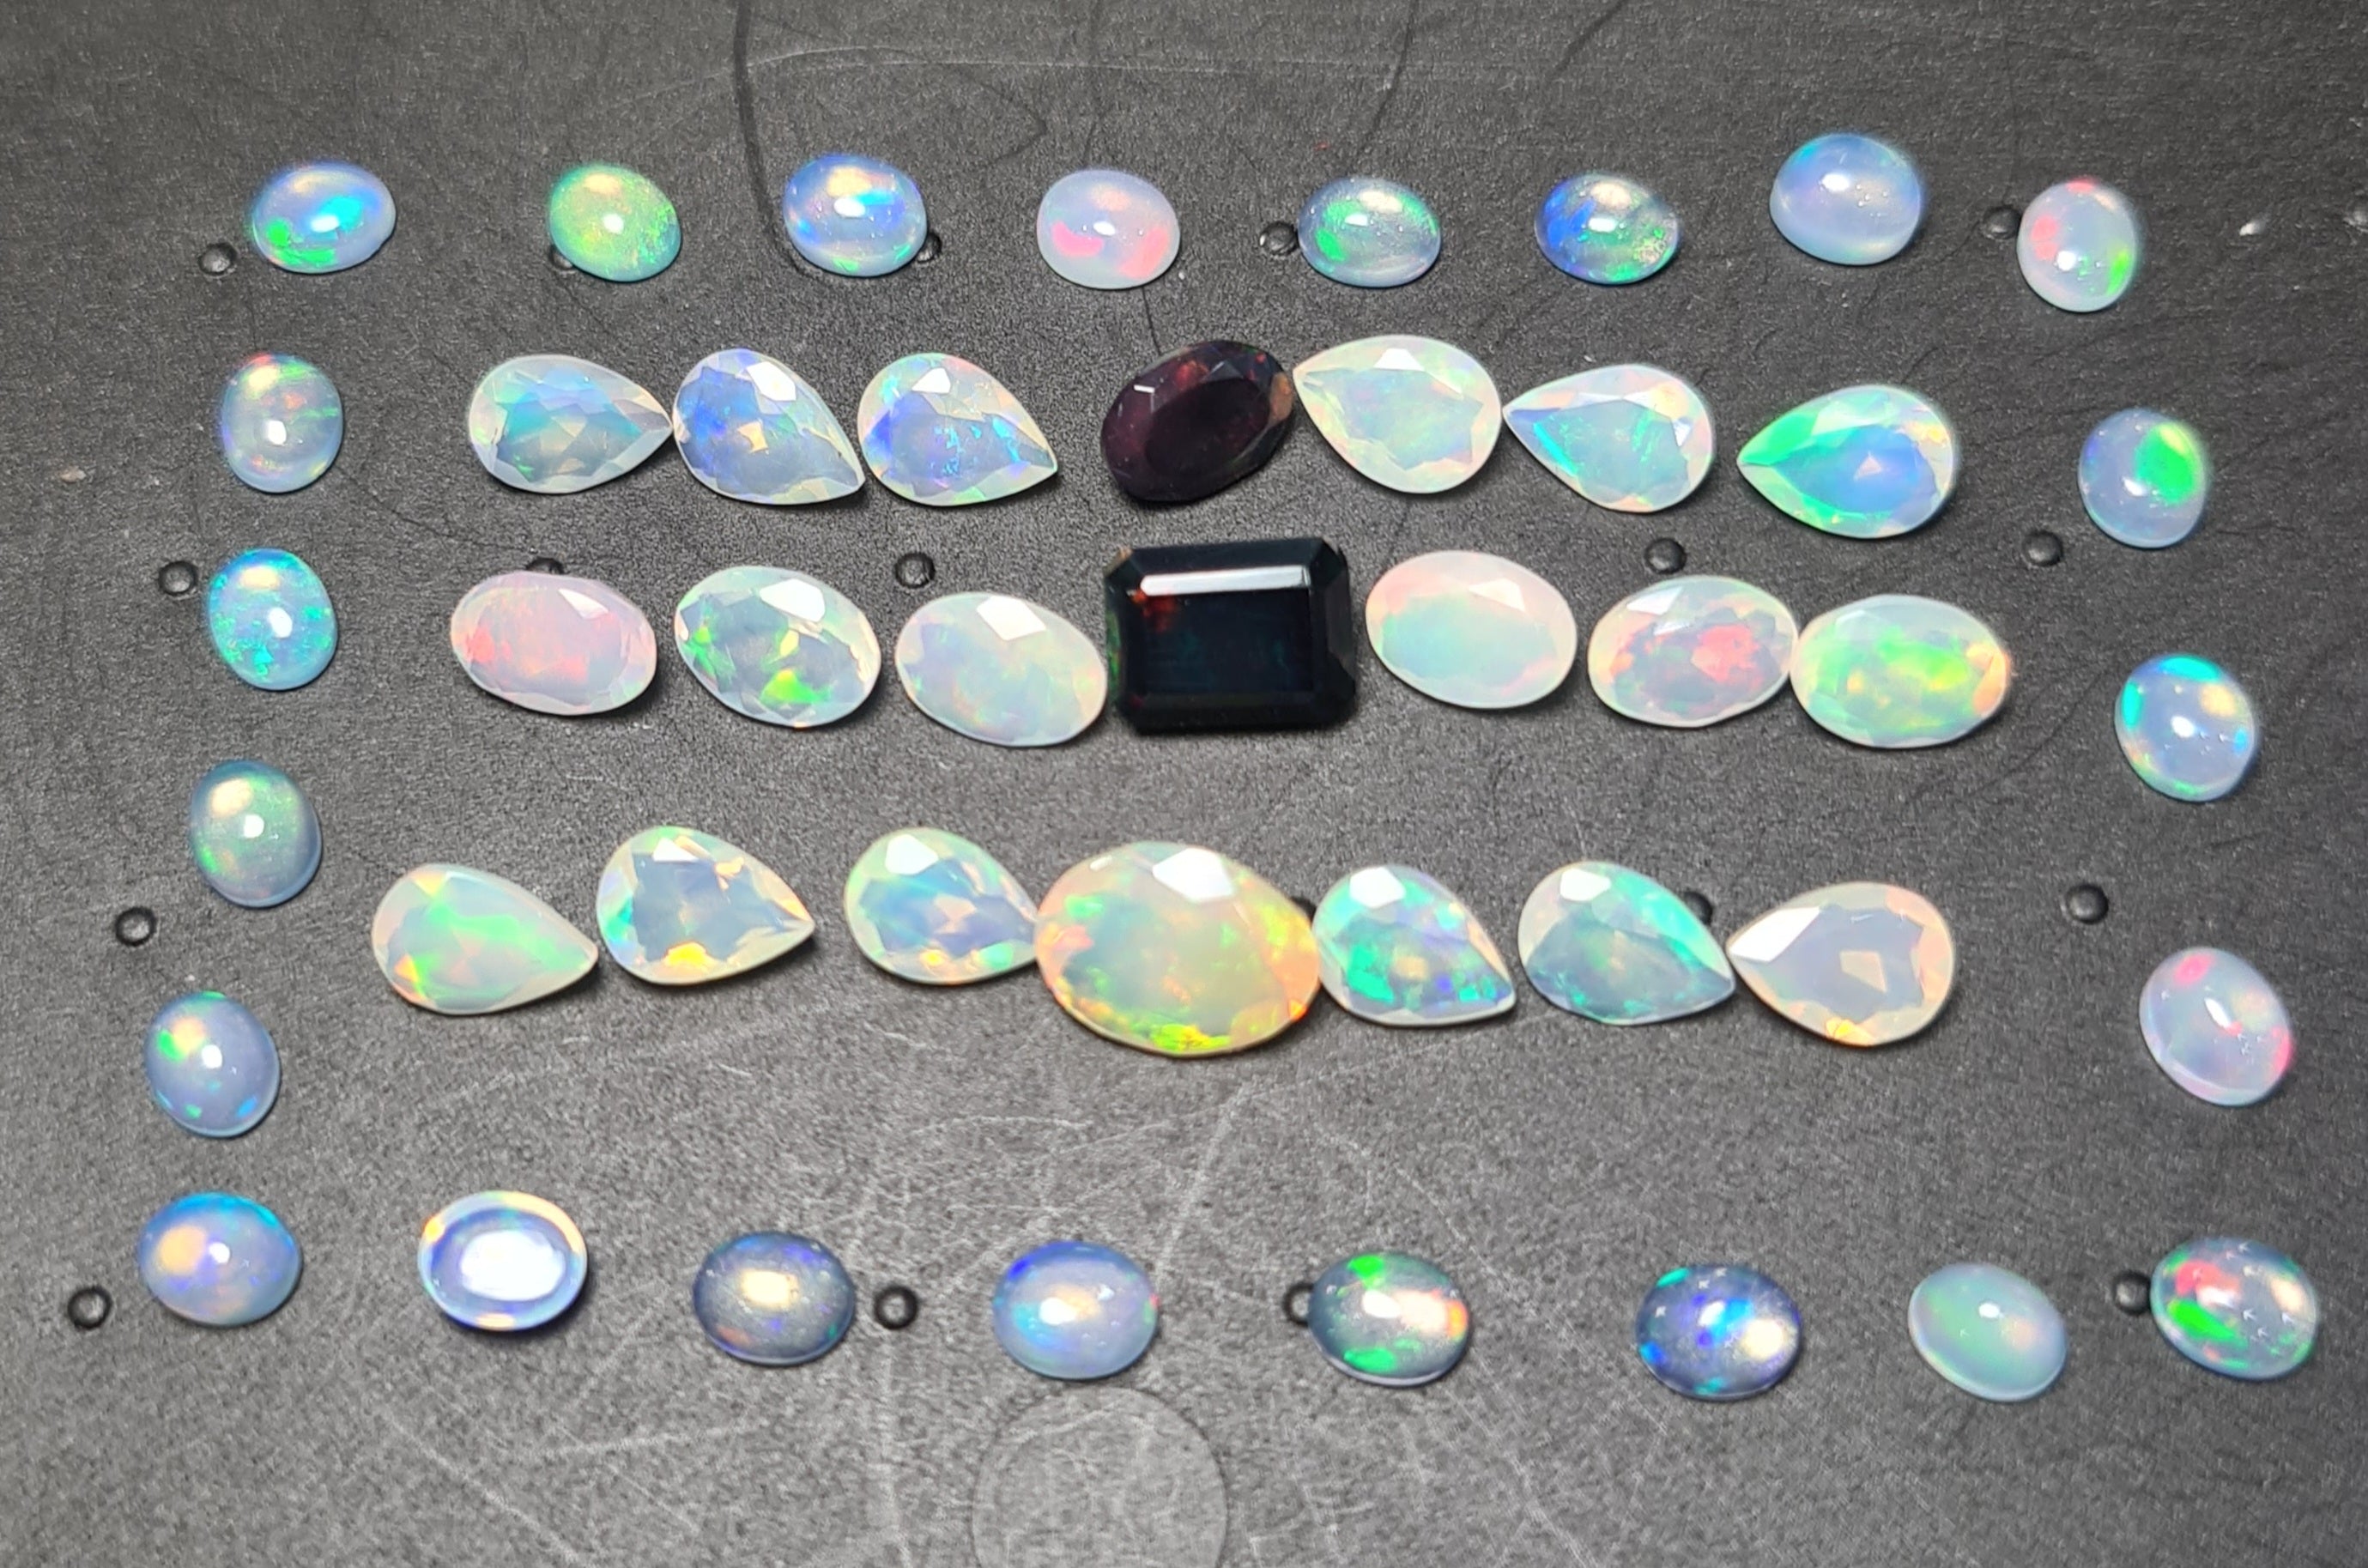 Wholesale Lot: 44 Pcs Natural Opal Faceted & Cabochon 5-9mm | 15.5Cts Approx. | Ethiopian Mined Untreated - The LabradoriteKing